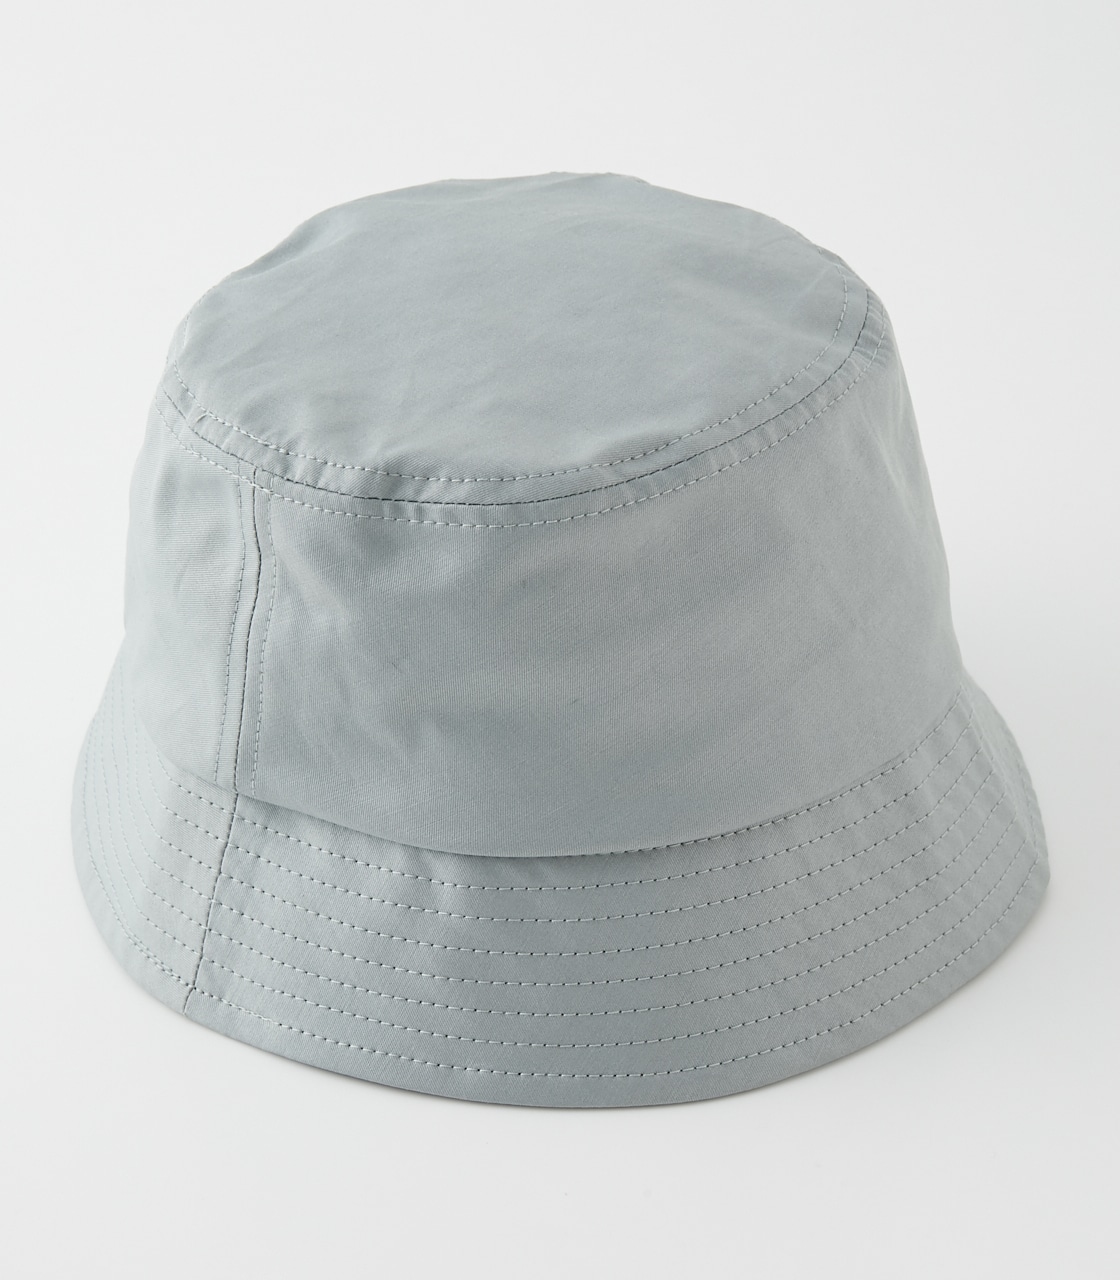 COMPACT DEEPLY BUCKET HAT/コンパクトディープリーバケットハット 詳細画像 L/GRY 3